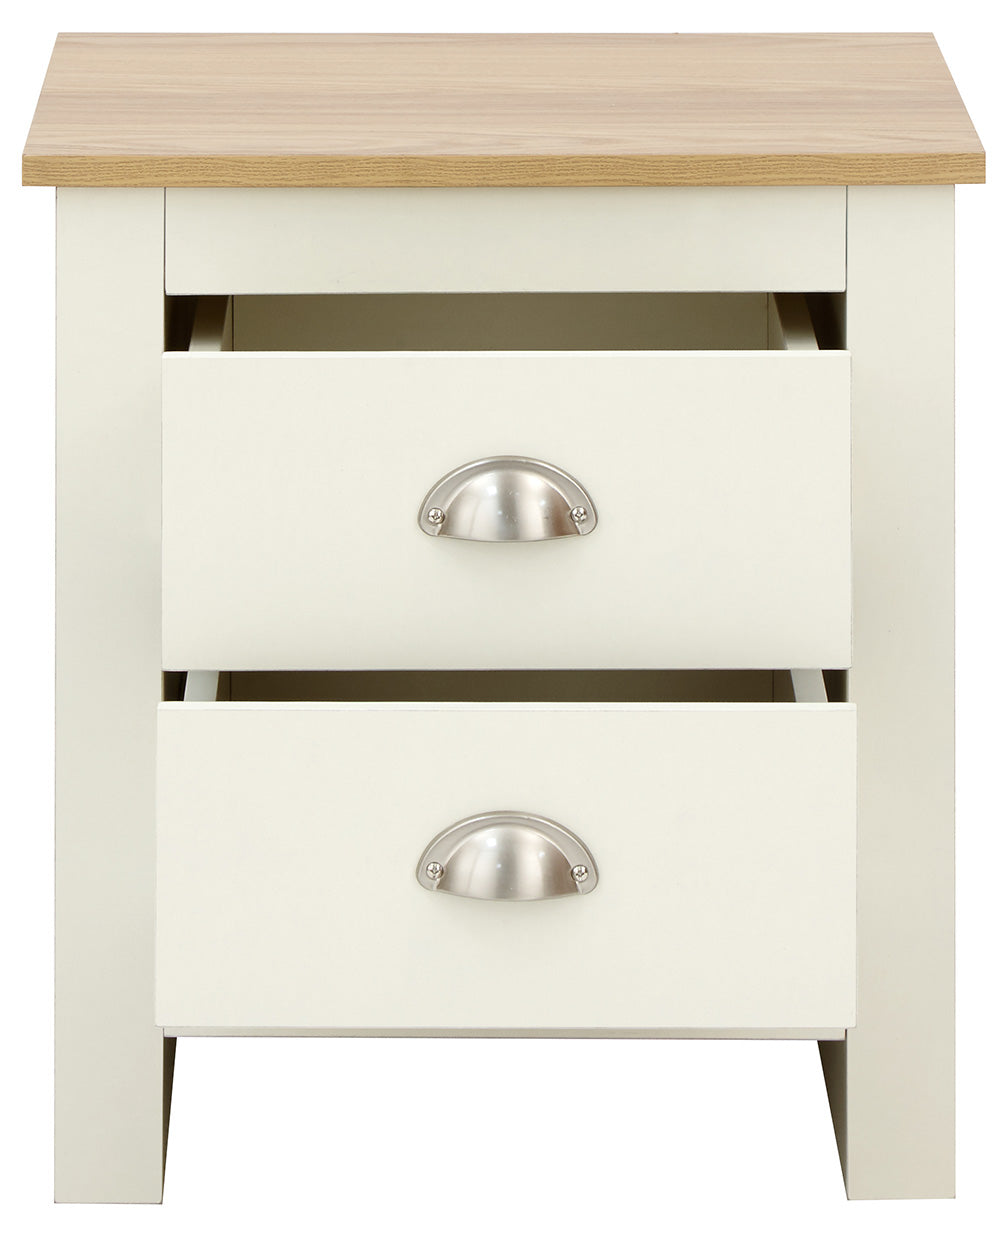 Lancaster bedside cabinet in cream with an oak effect top  on a white background with both drawers open